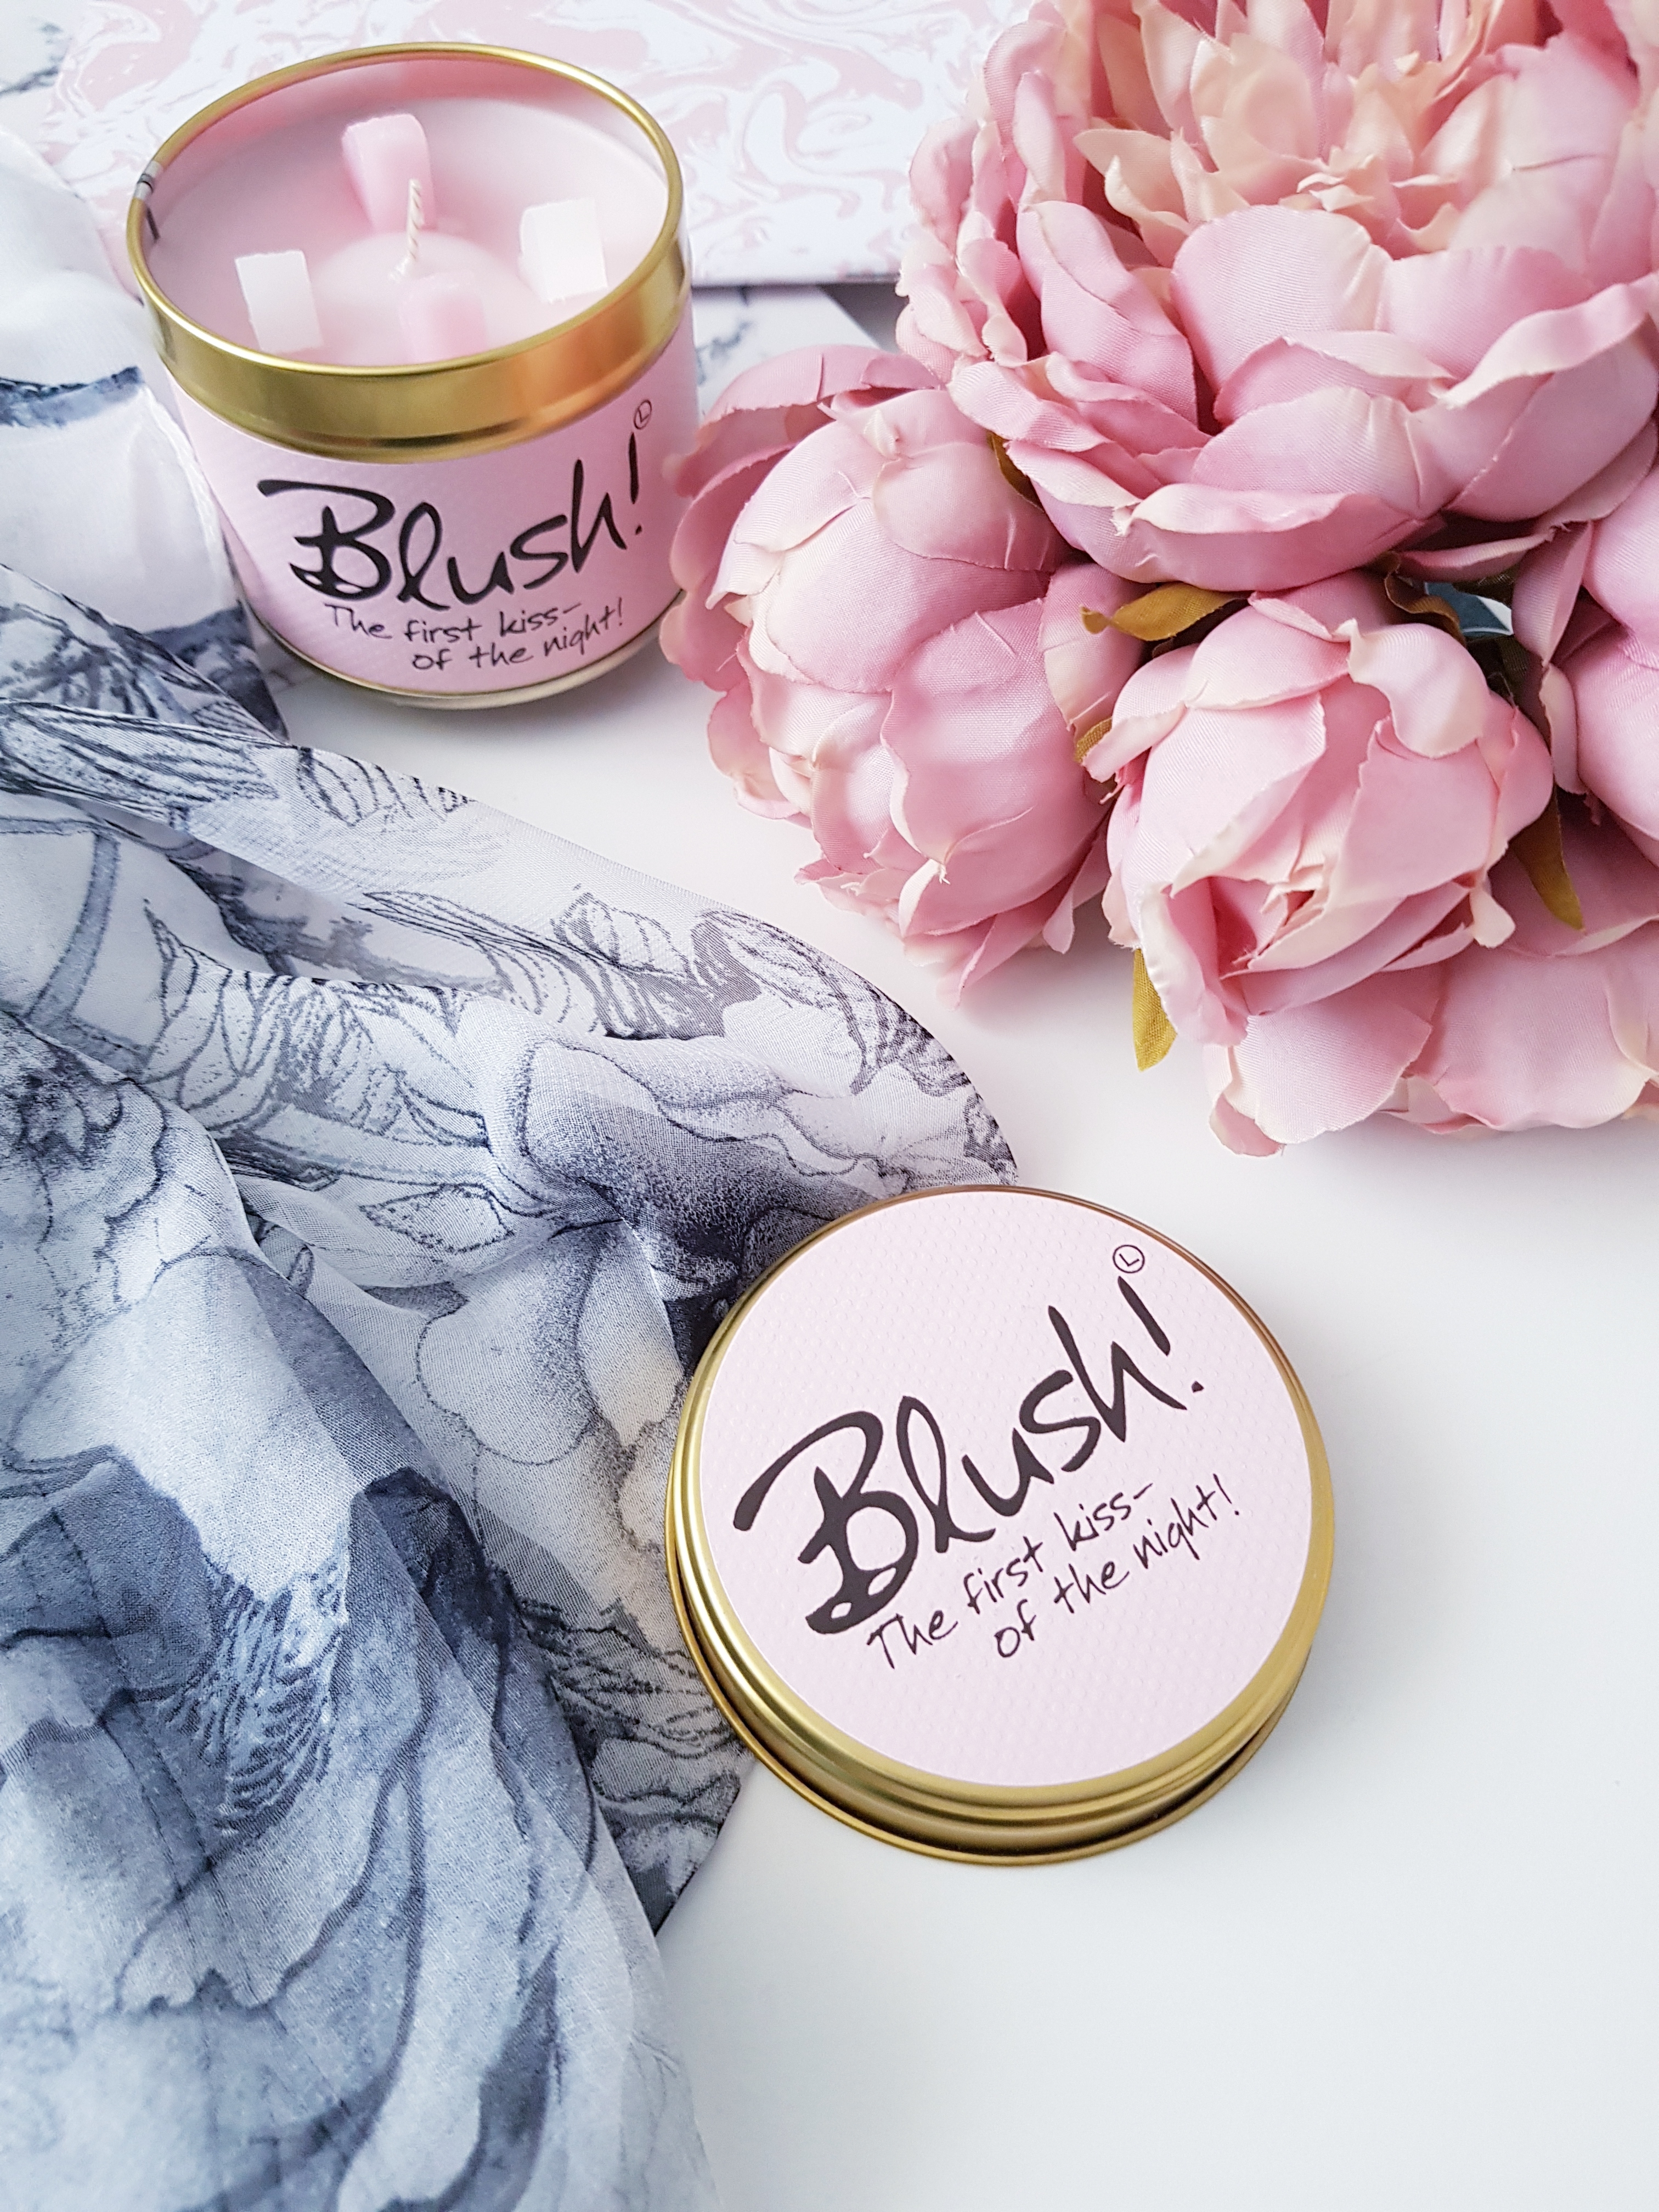 Blush - The first kiss of the Night Candle - Ms Tantrum Blog